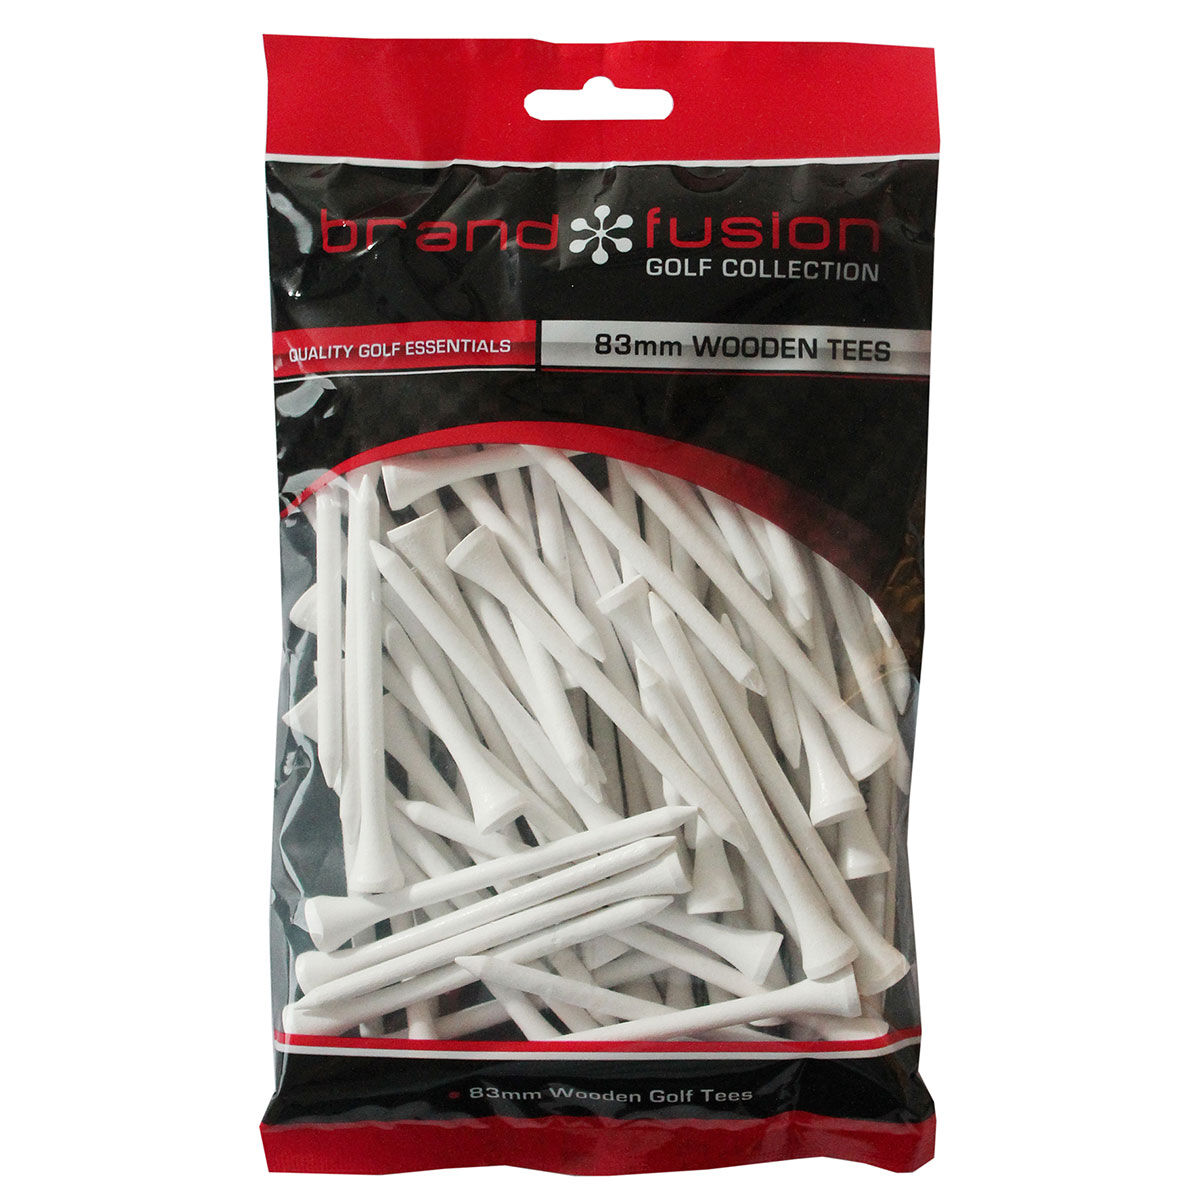 BrandFusion White Wooden Golf Tees 80 Bumper Pack, Size: 83mm | American Golf von BrandFusion